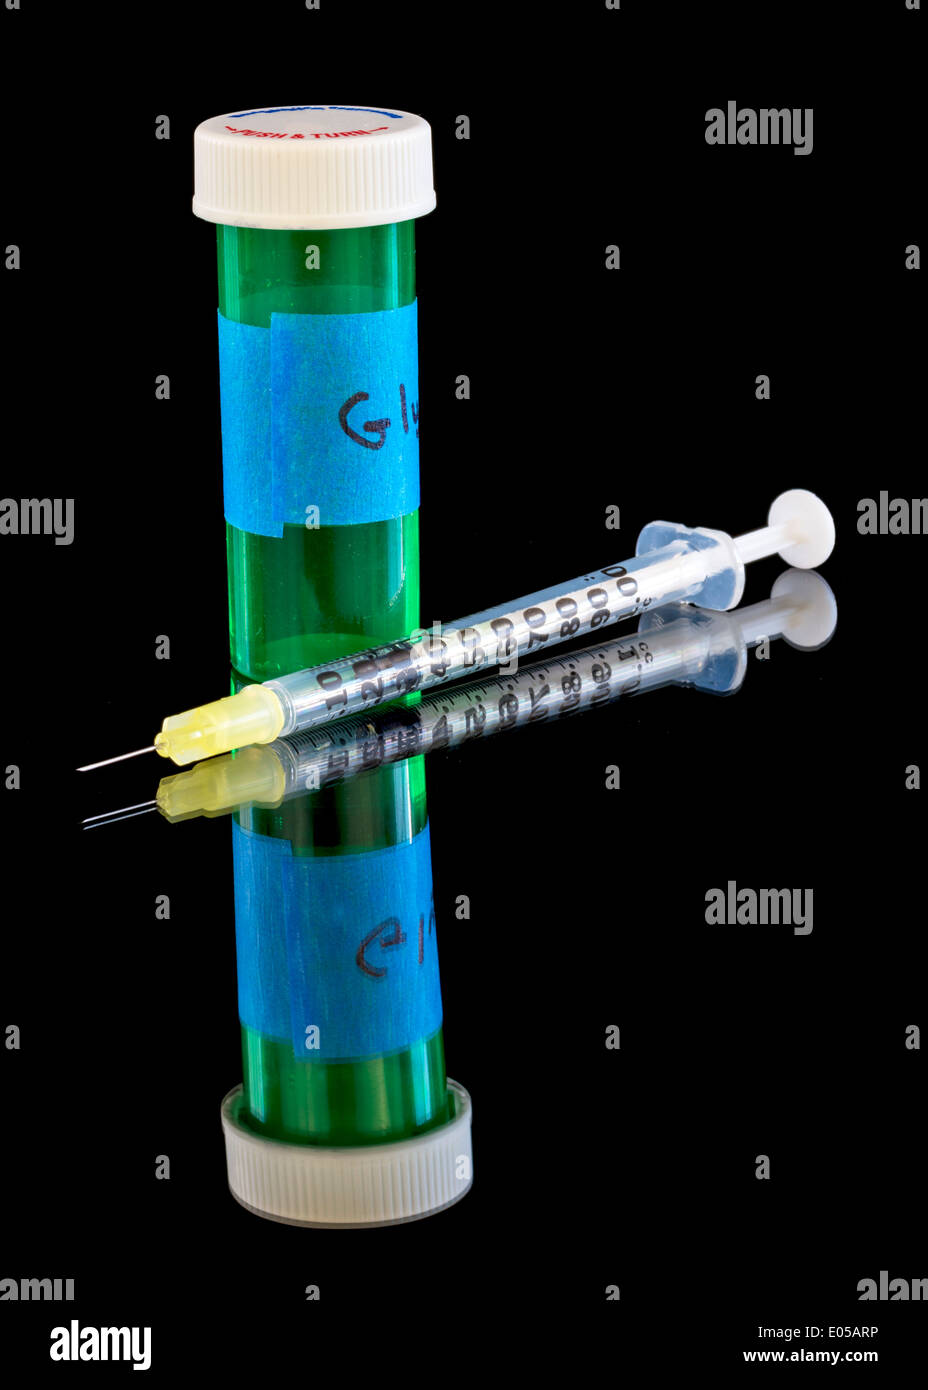 hypodermic needle and jar of medicine ready to inject Stock Photo